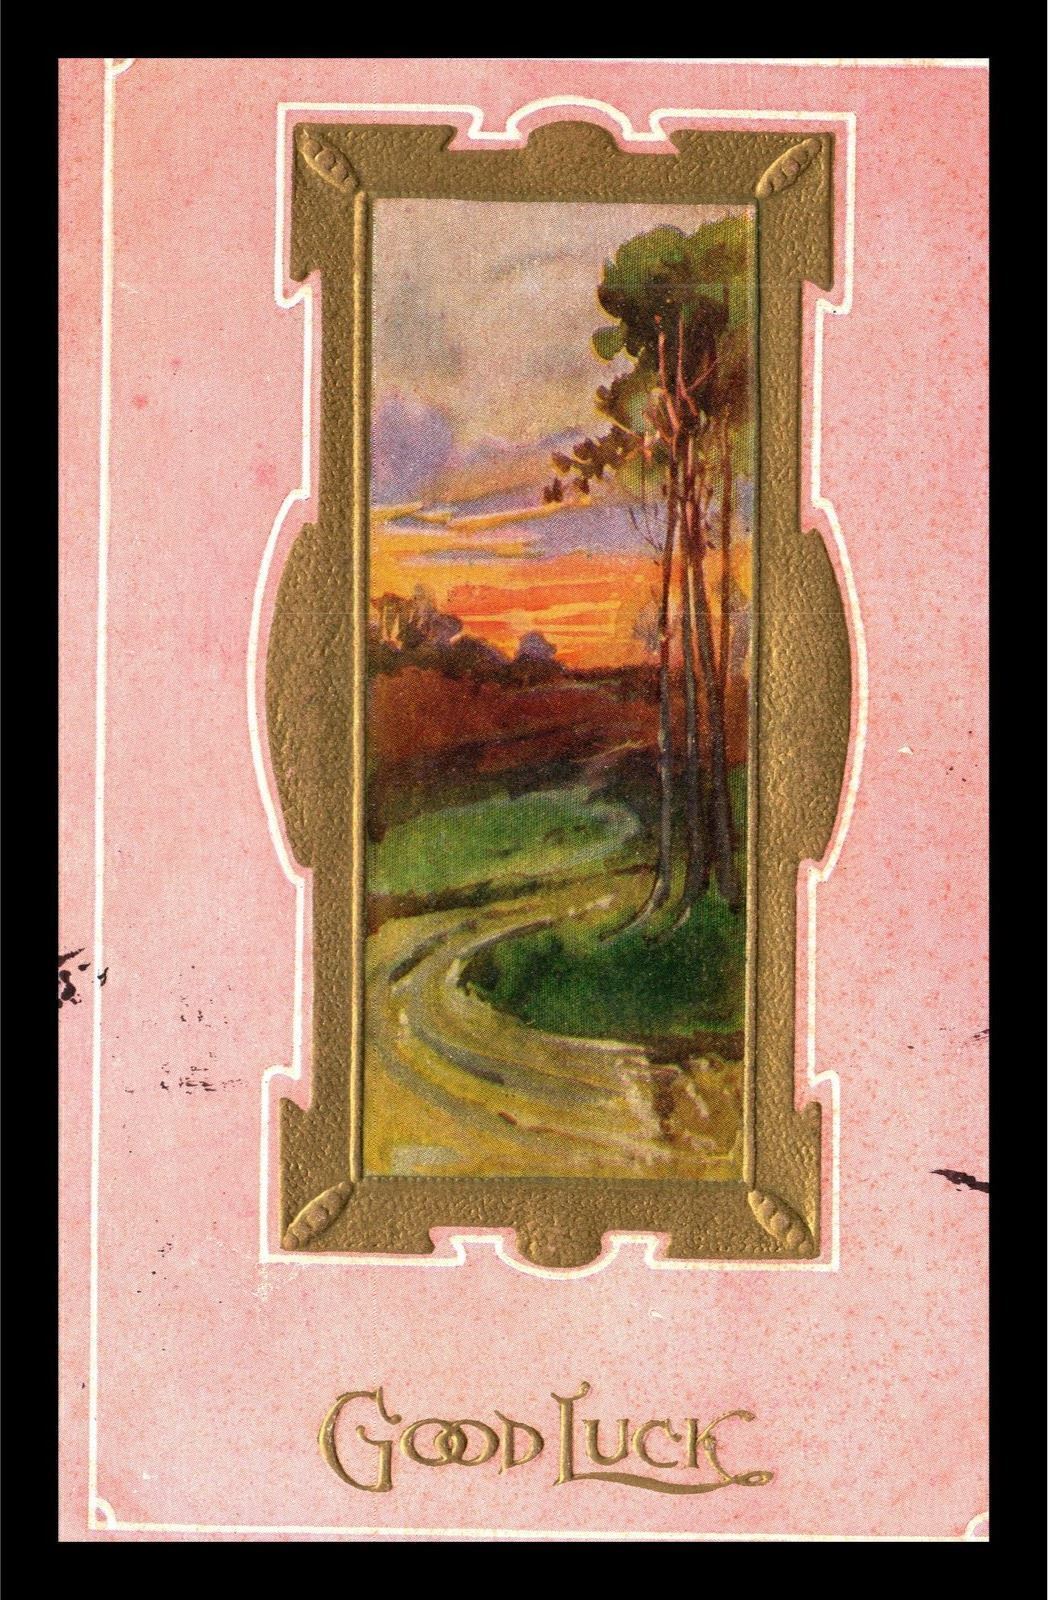 1911 Good Luck Sunset Dirt Road Trees Hand Painted Embossed Postcard 283